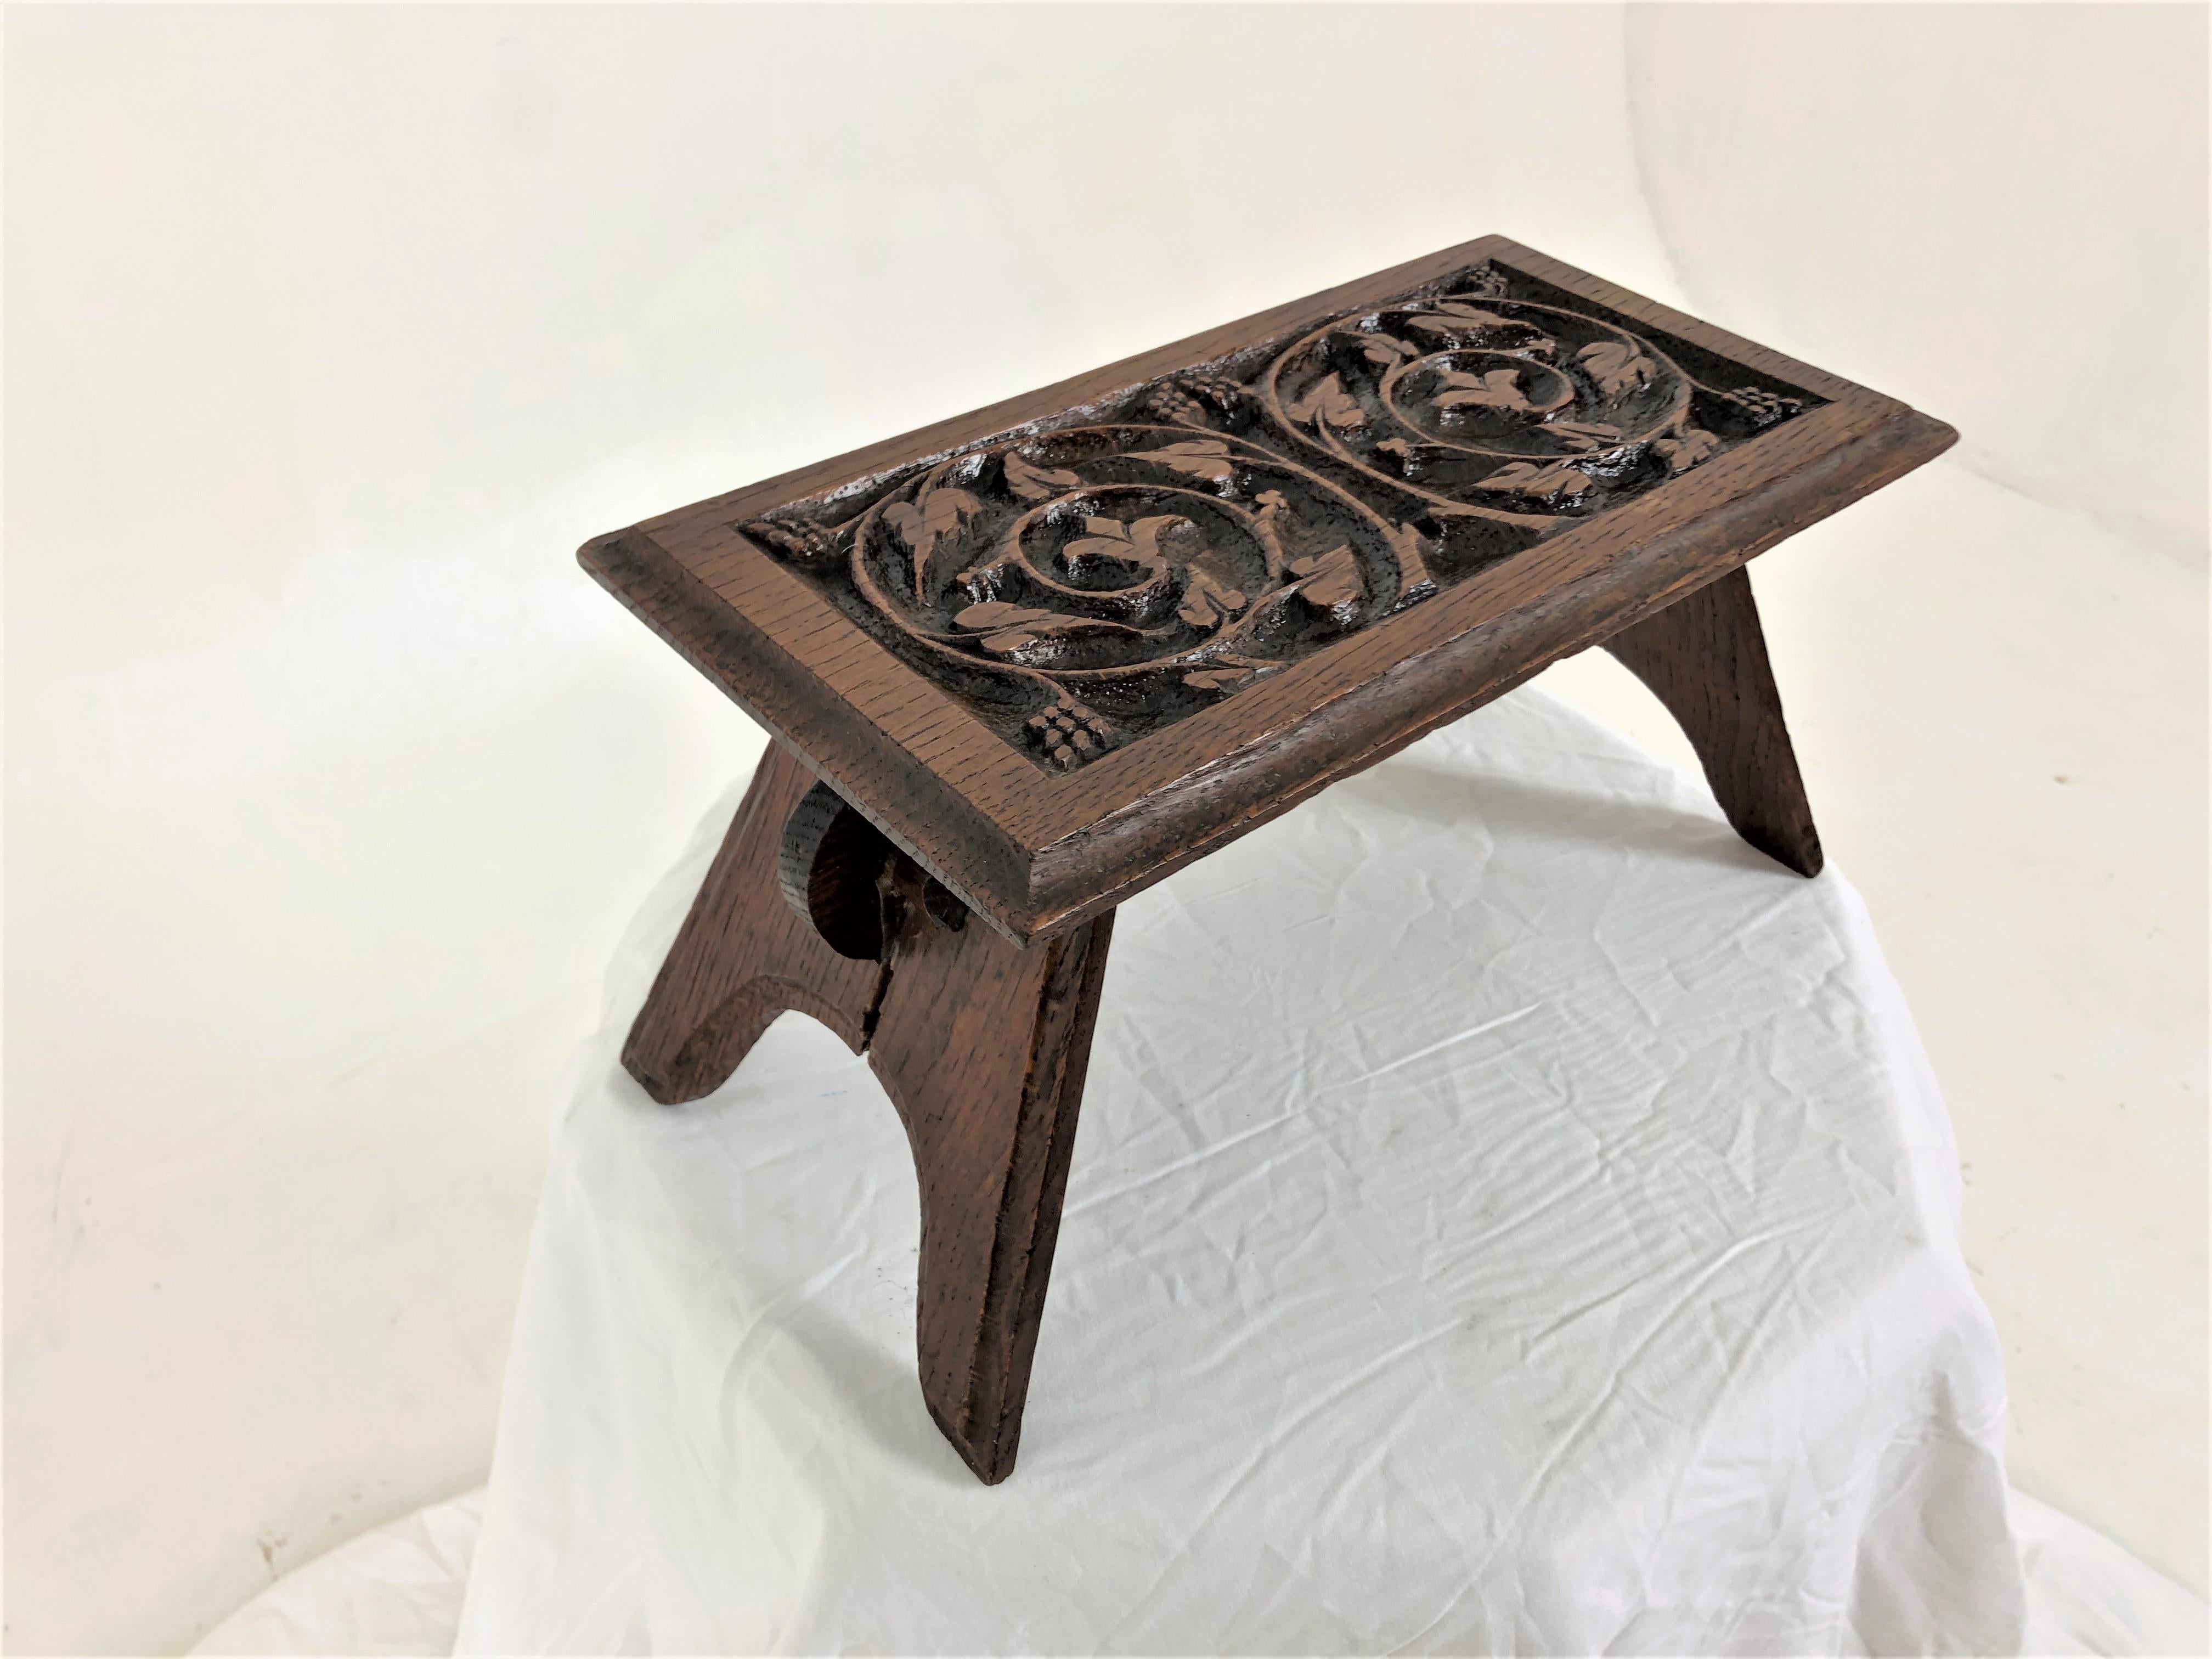 Antique Victorian carved oak stool, table, Art and Crafts, Scotland 1950, H832

Scotland 1950
Solid Oak
Original Finish 
Rectangular carved top with bevelled edge
Shaped supports on the ends
All joined by a open shaped stretcher
Nice colour